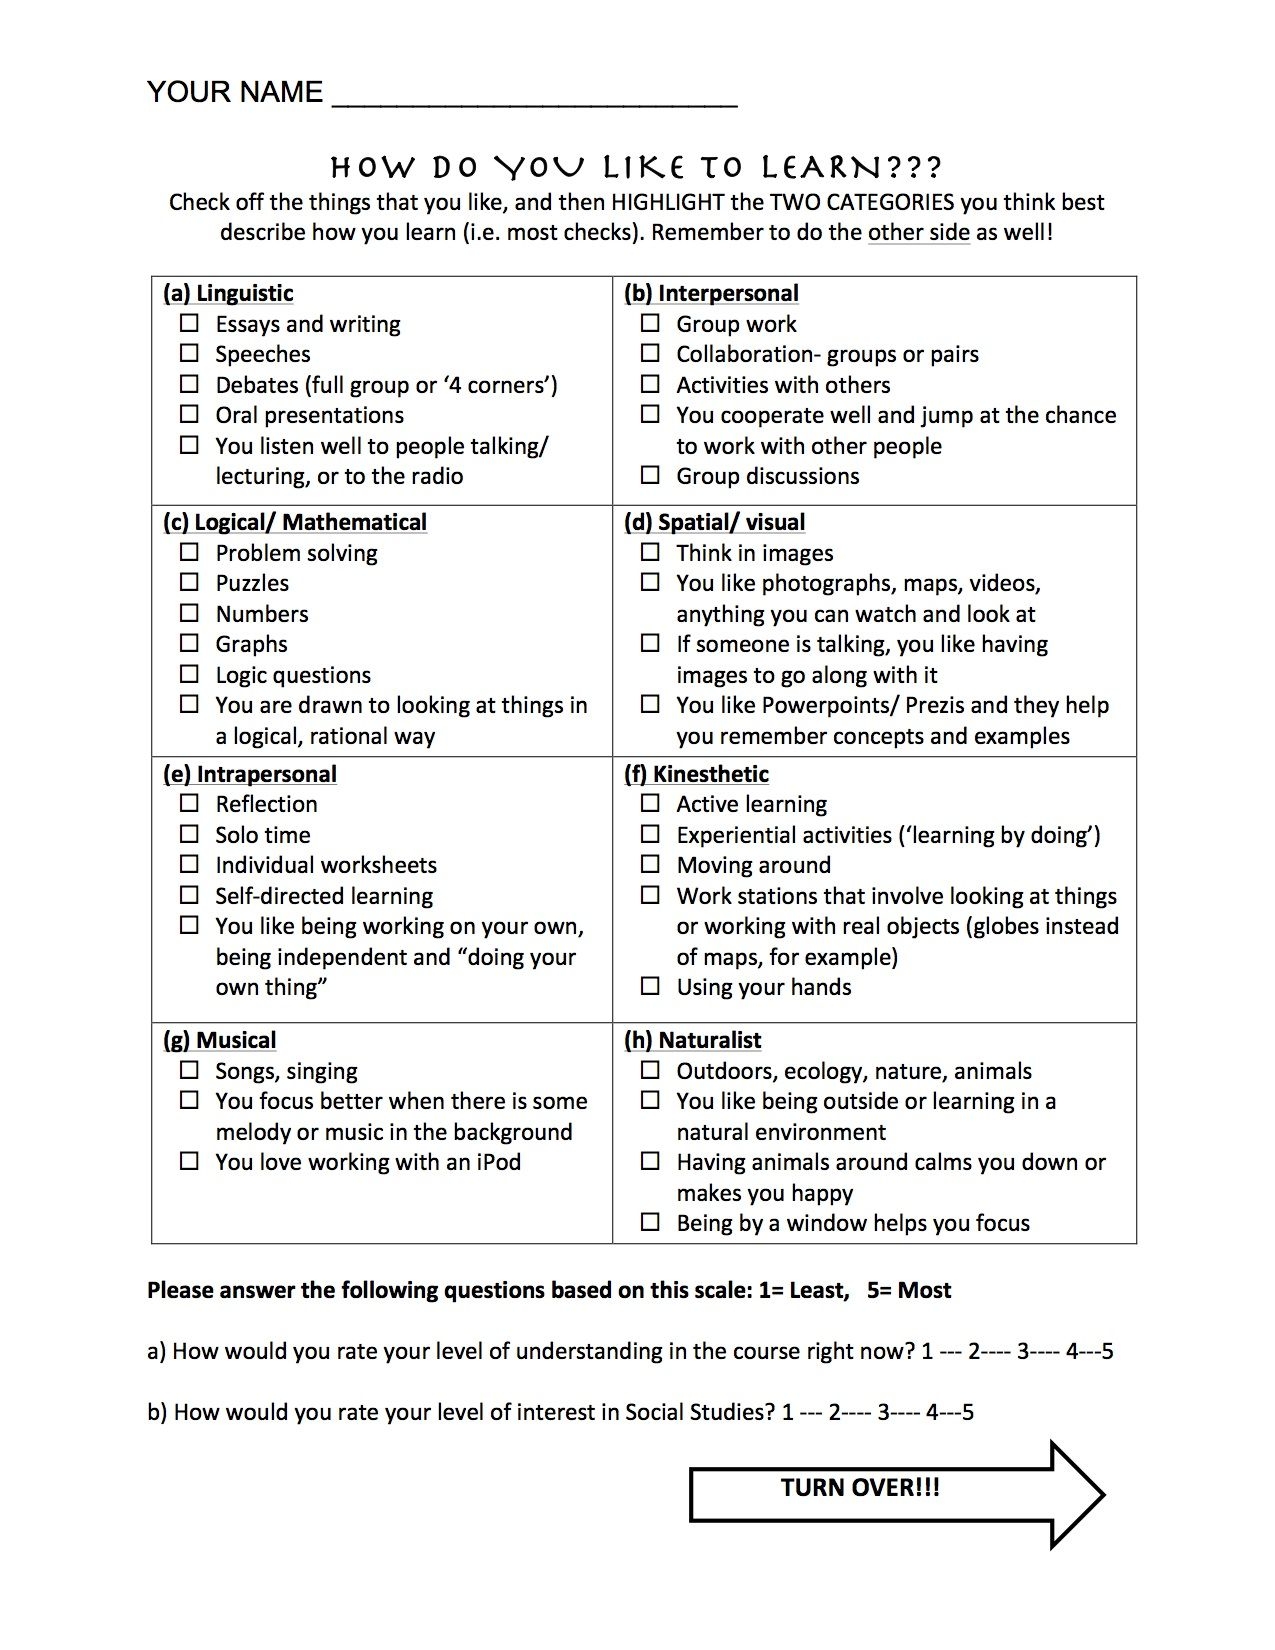 Educational Support And Grant Resources Learning Styles Learning Style Quiz Learning Style Inventory - Free Learning Style Inventory For Students Printable